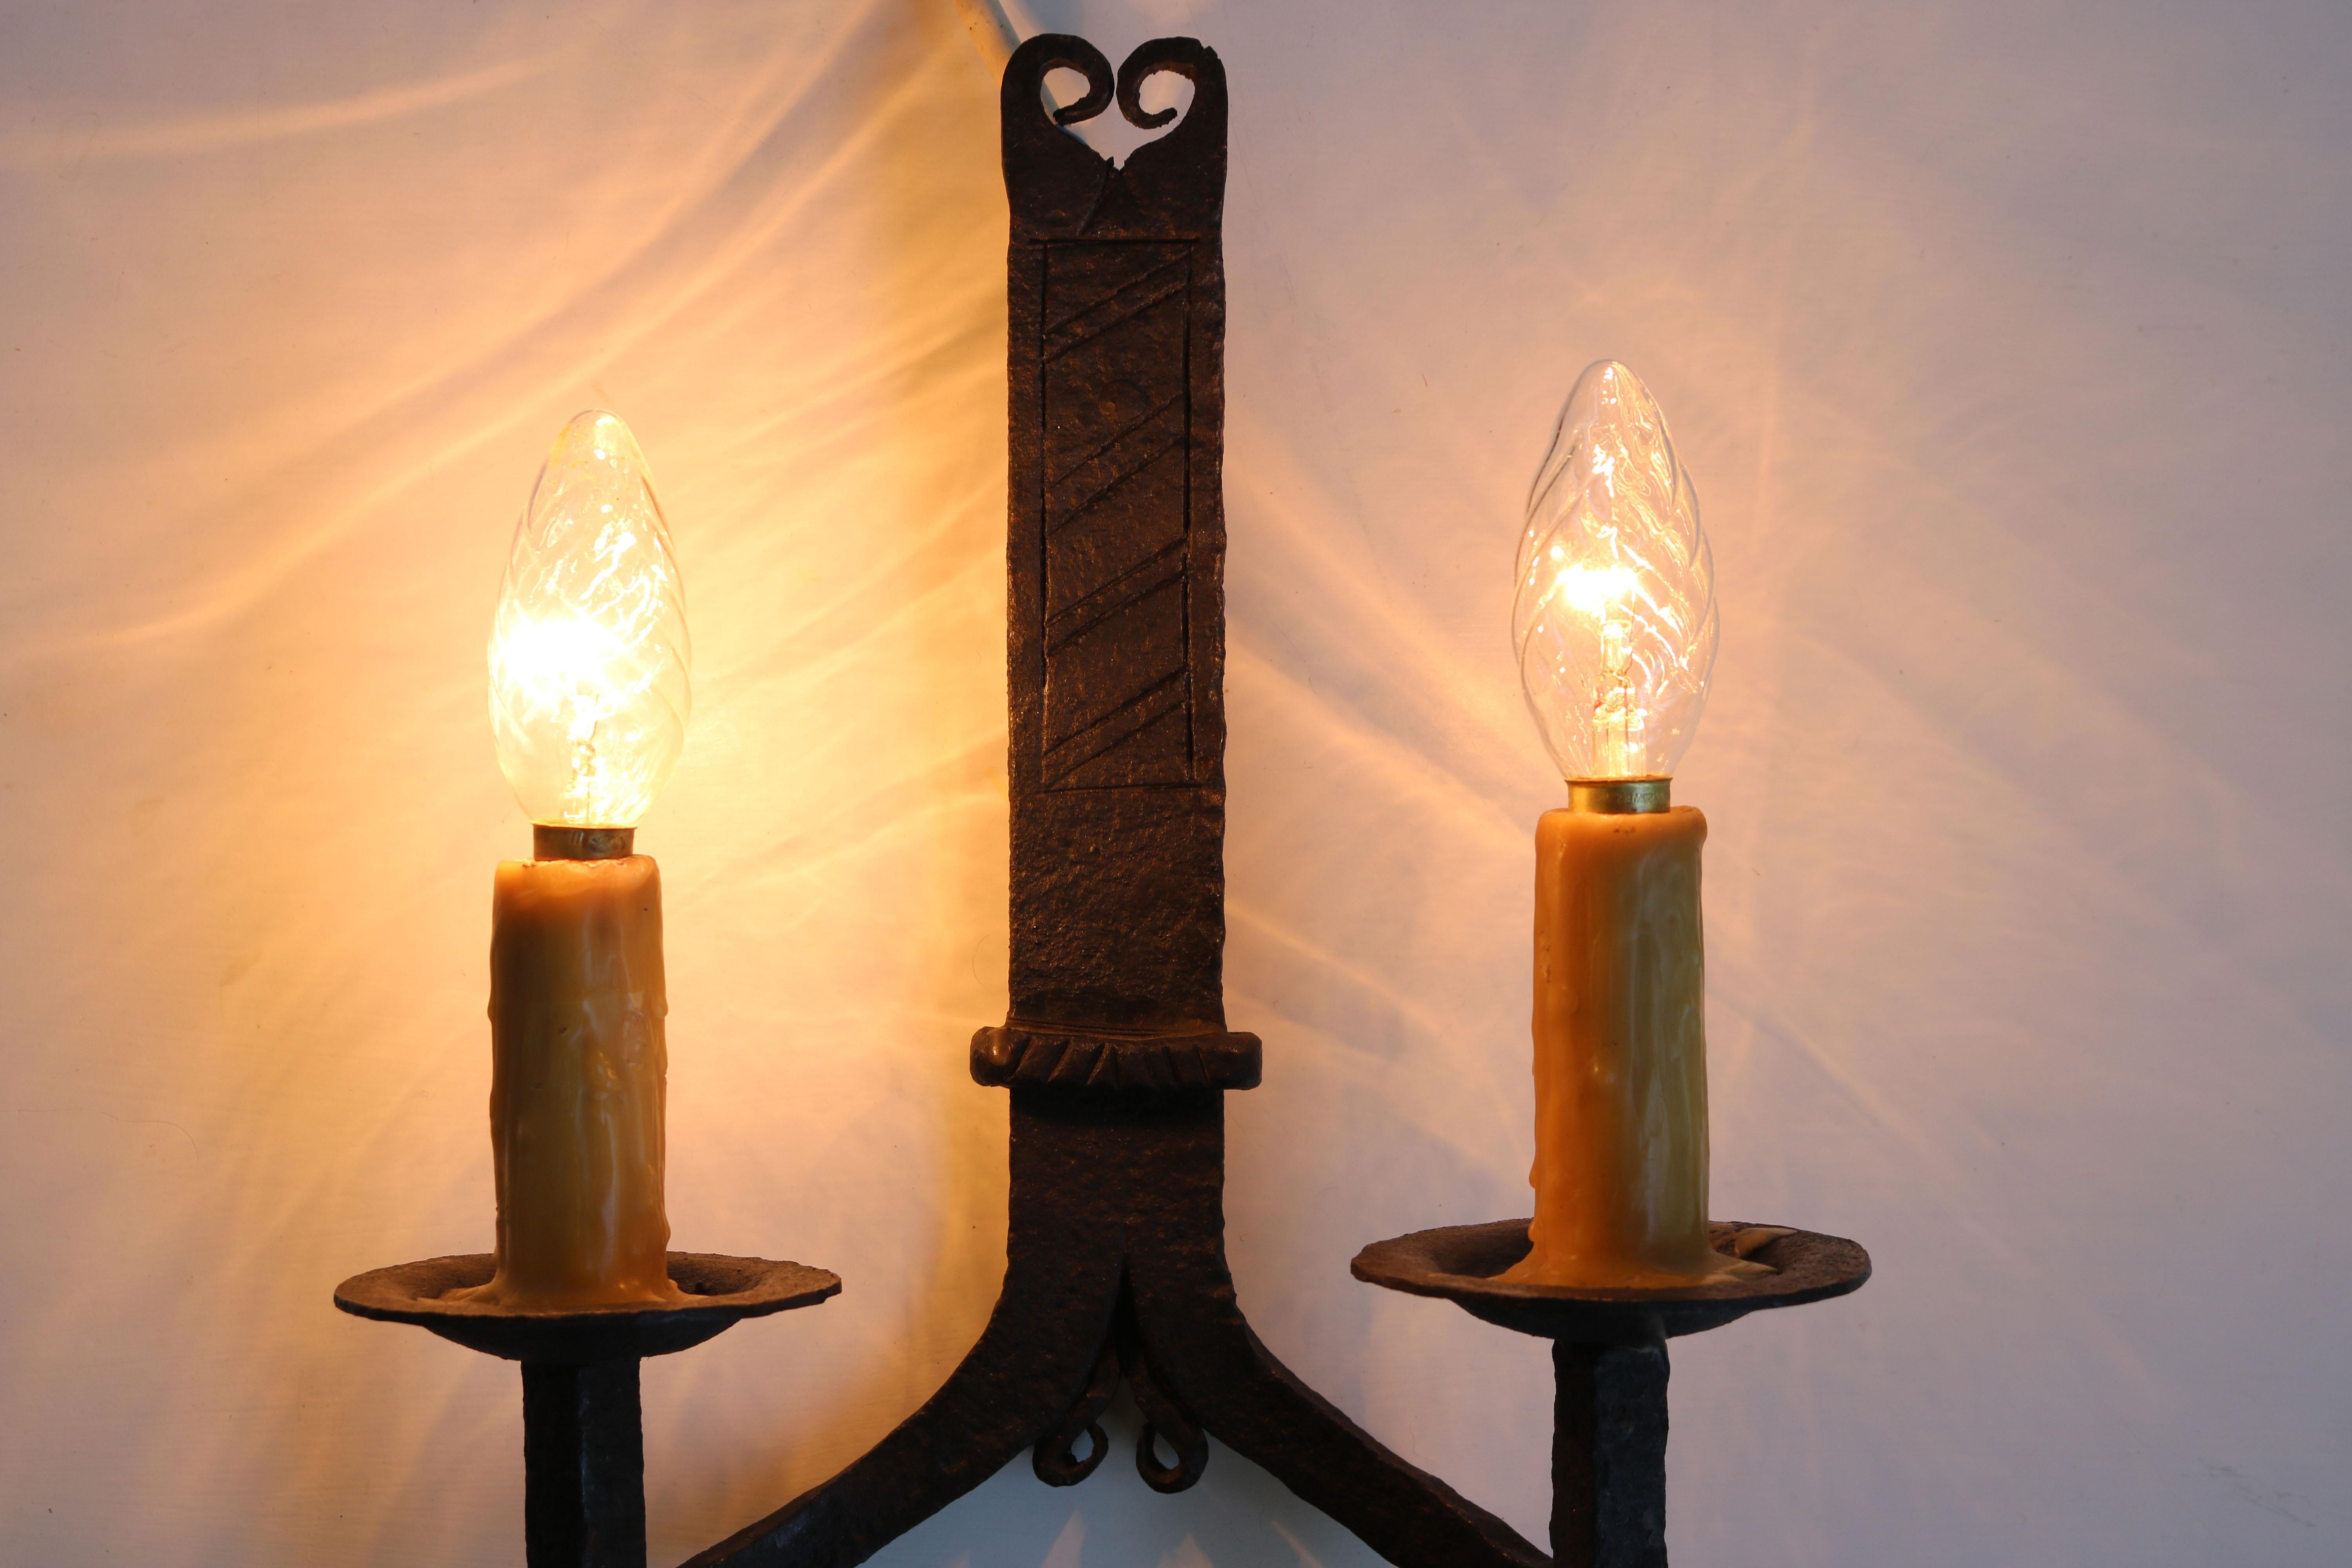 Lovely pair of hand-crafted wrought iron wall lights from France 1900. Gothic revival style or Arts & crafts. 
They are heavy and fully hand made, really gorgeous details. 
Fully original with gorgeous candle wax covered light sockets. 

They